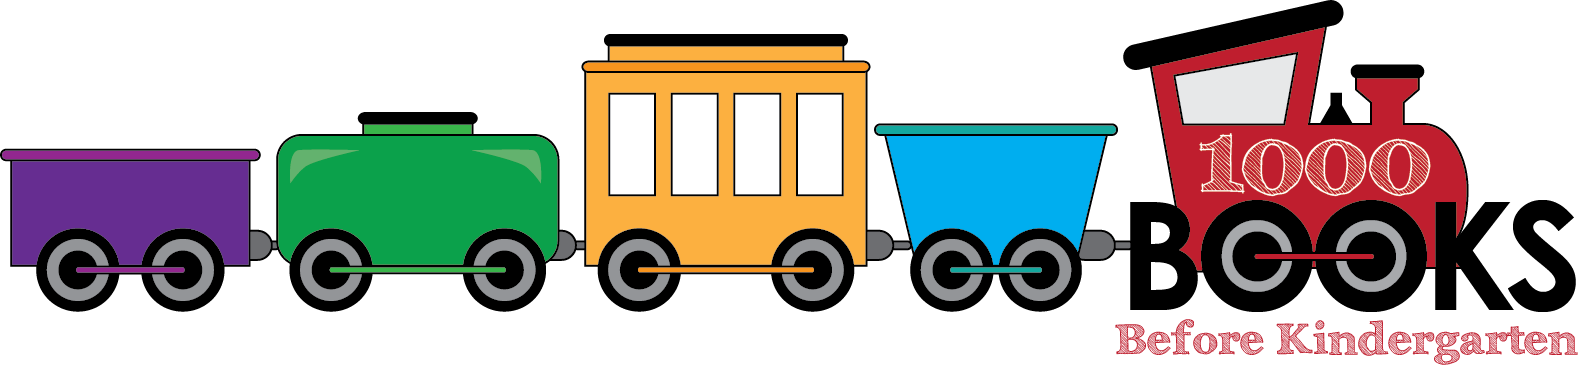 Drawing of a choo-choo train with BOOKS spelled out as the wheels of the engine. There are 4 cars following the engine.